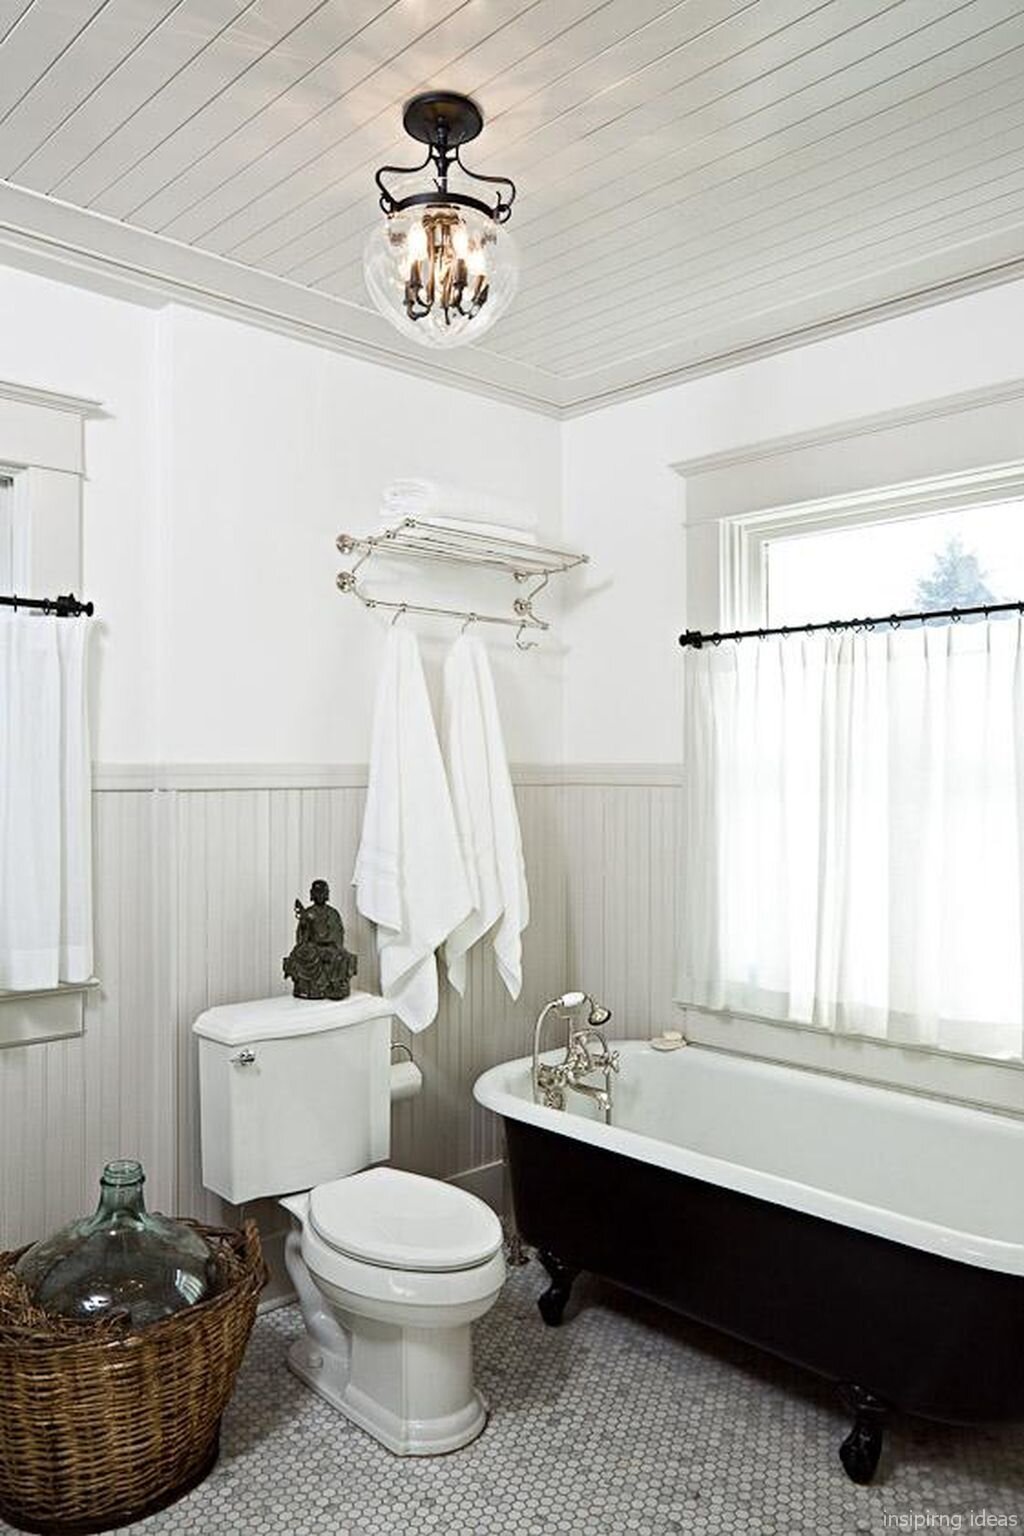 Bathroom Beadboard Ideas - 10 Bathroom Wainscoting Ideas Photos Of Pretty Wainscoted Bathrooms Apartment Therapy / This traditional powder room with beadboard is easy to recreate and full of character.